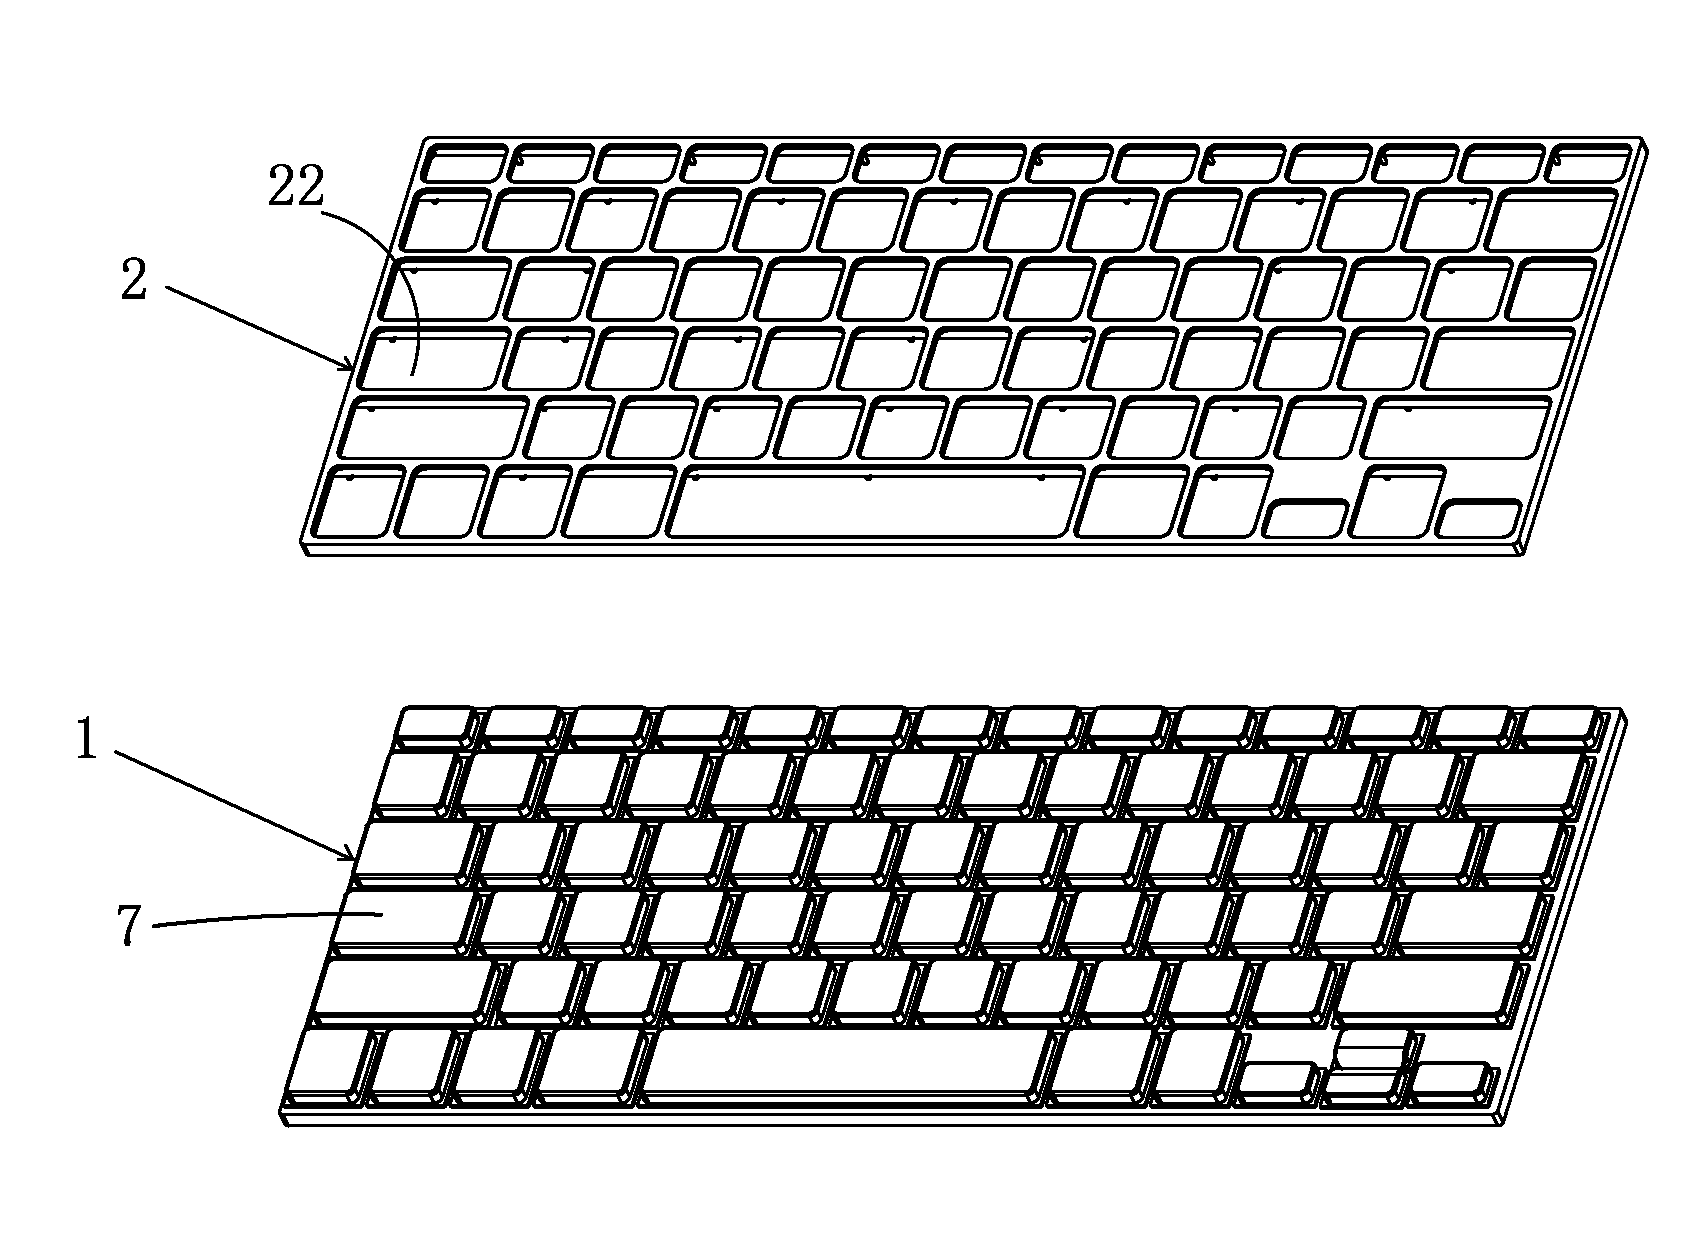 Keyboard Preventable Keycaps from Breaking off